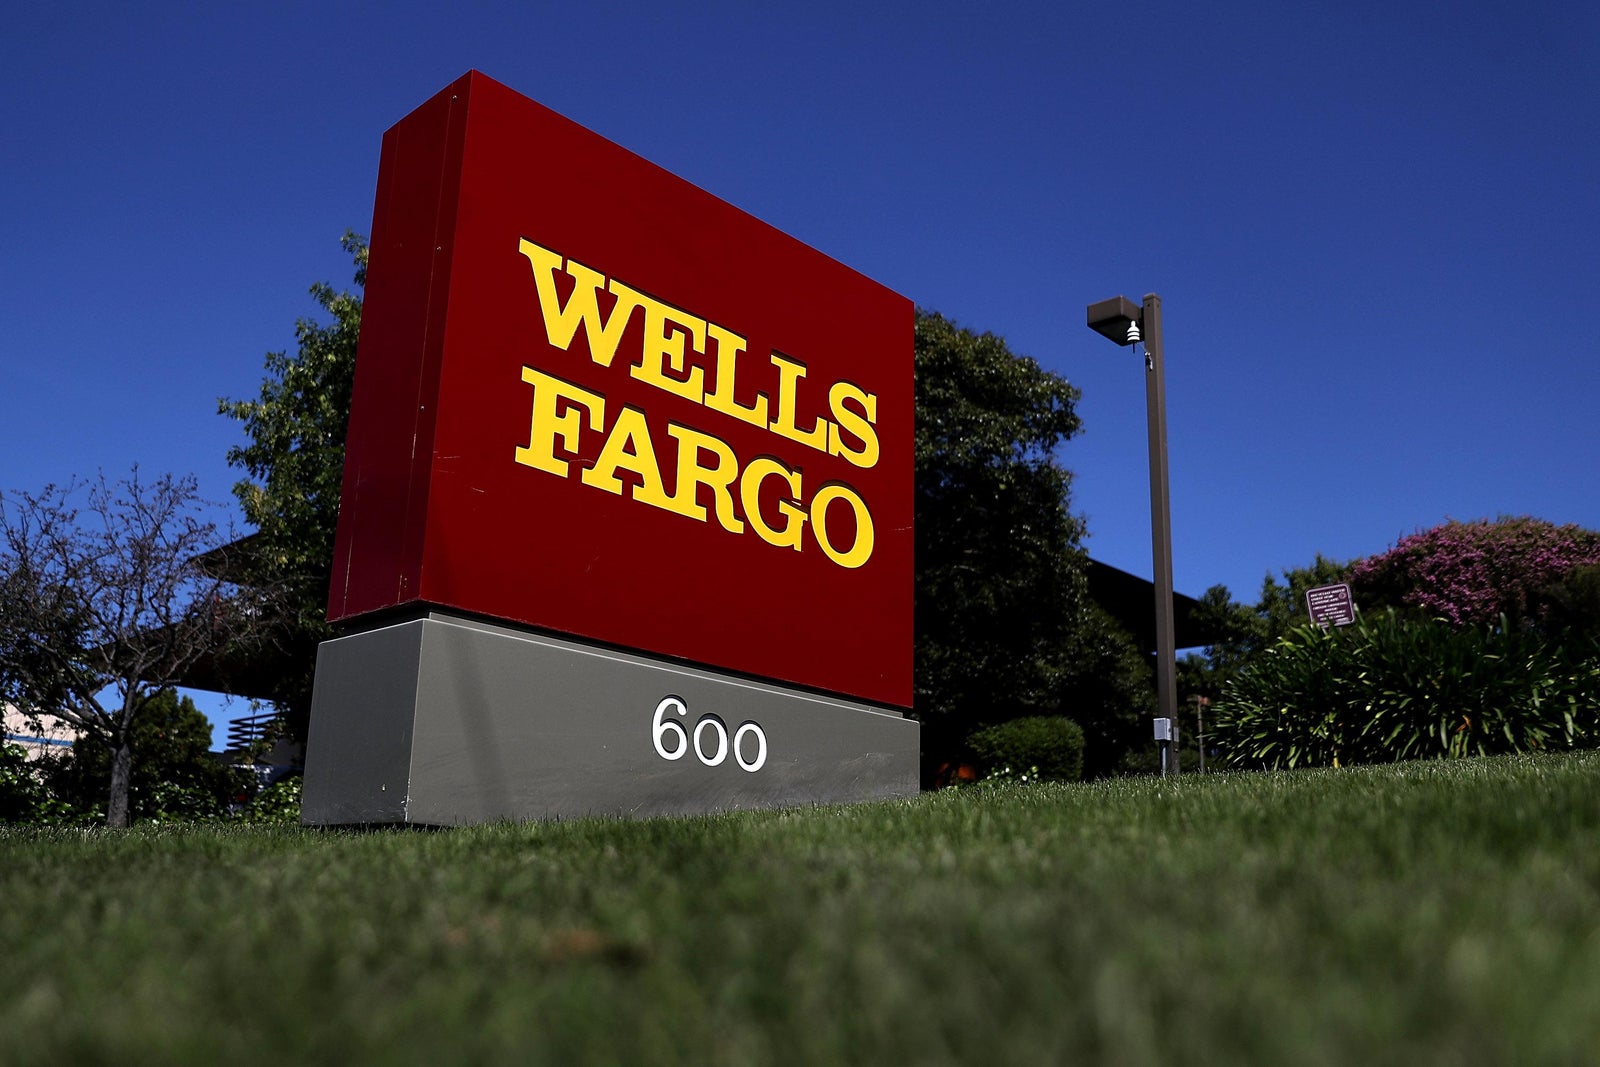 Wells Fargo customers faced foreclosures after a computer glitch.